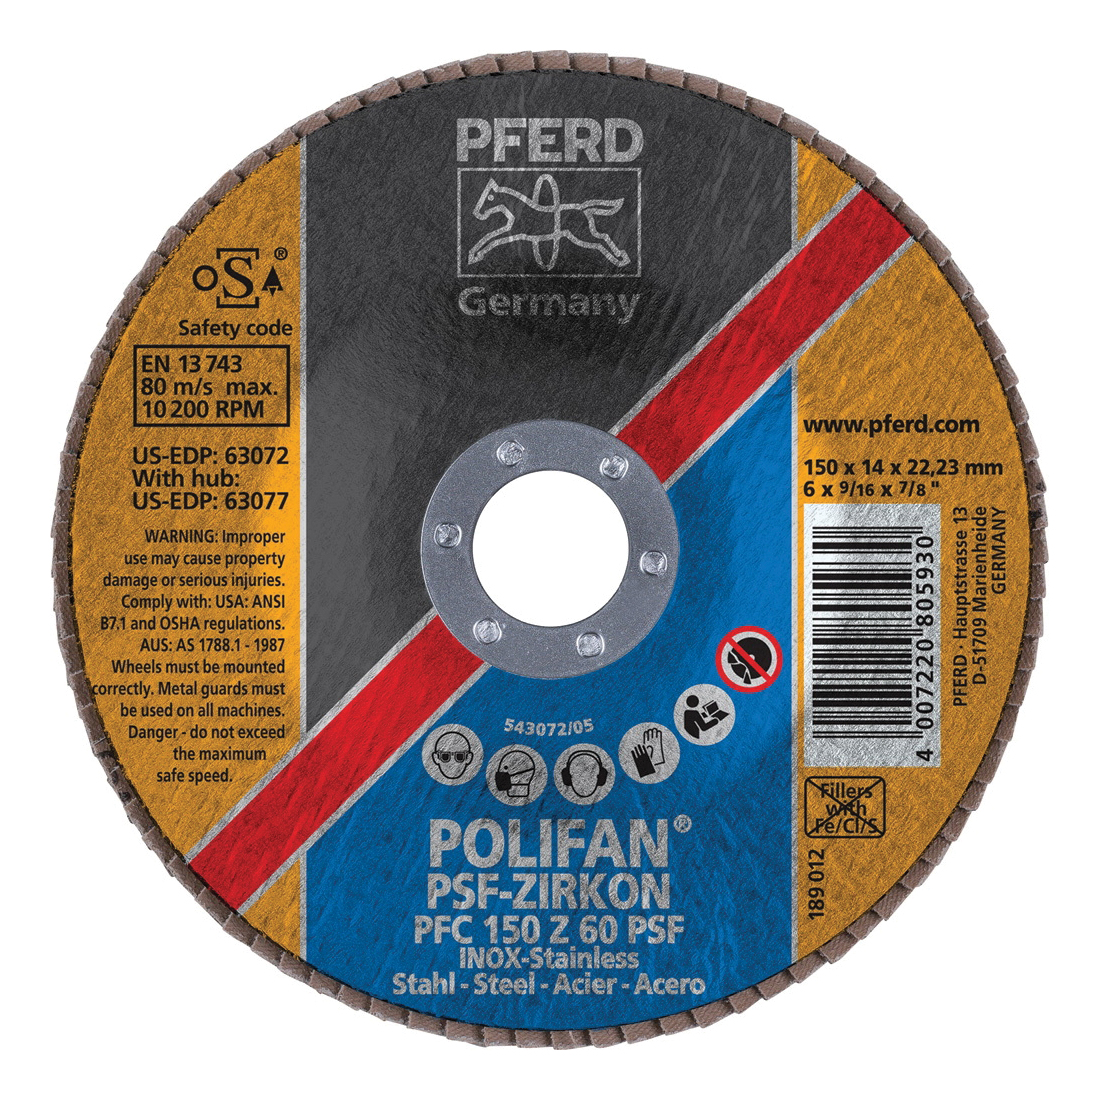 PFERD Polifan® 63072 Universal Line PSF-Z Unthreaded Coated Abrasive Flap Disc, 6 in Dia, 7/8 in Center Hole, 60 Grit, Zirconia Alumina Abrasive, Type 29 Conical Disc